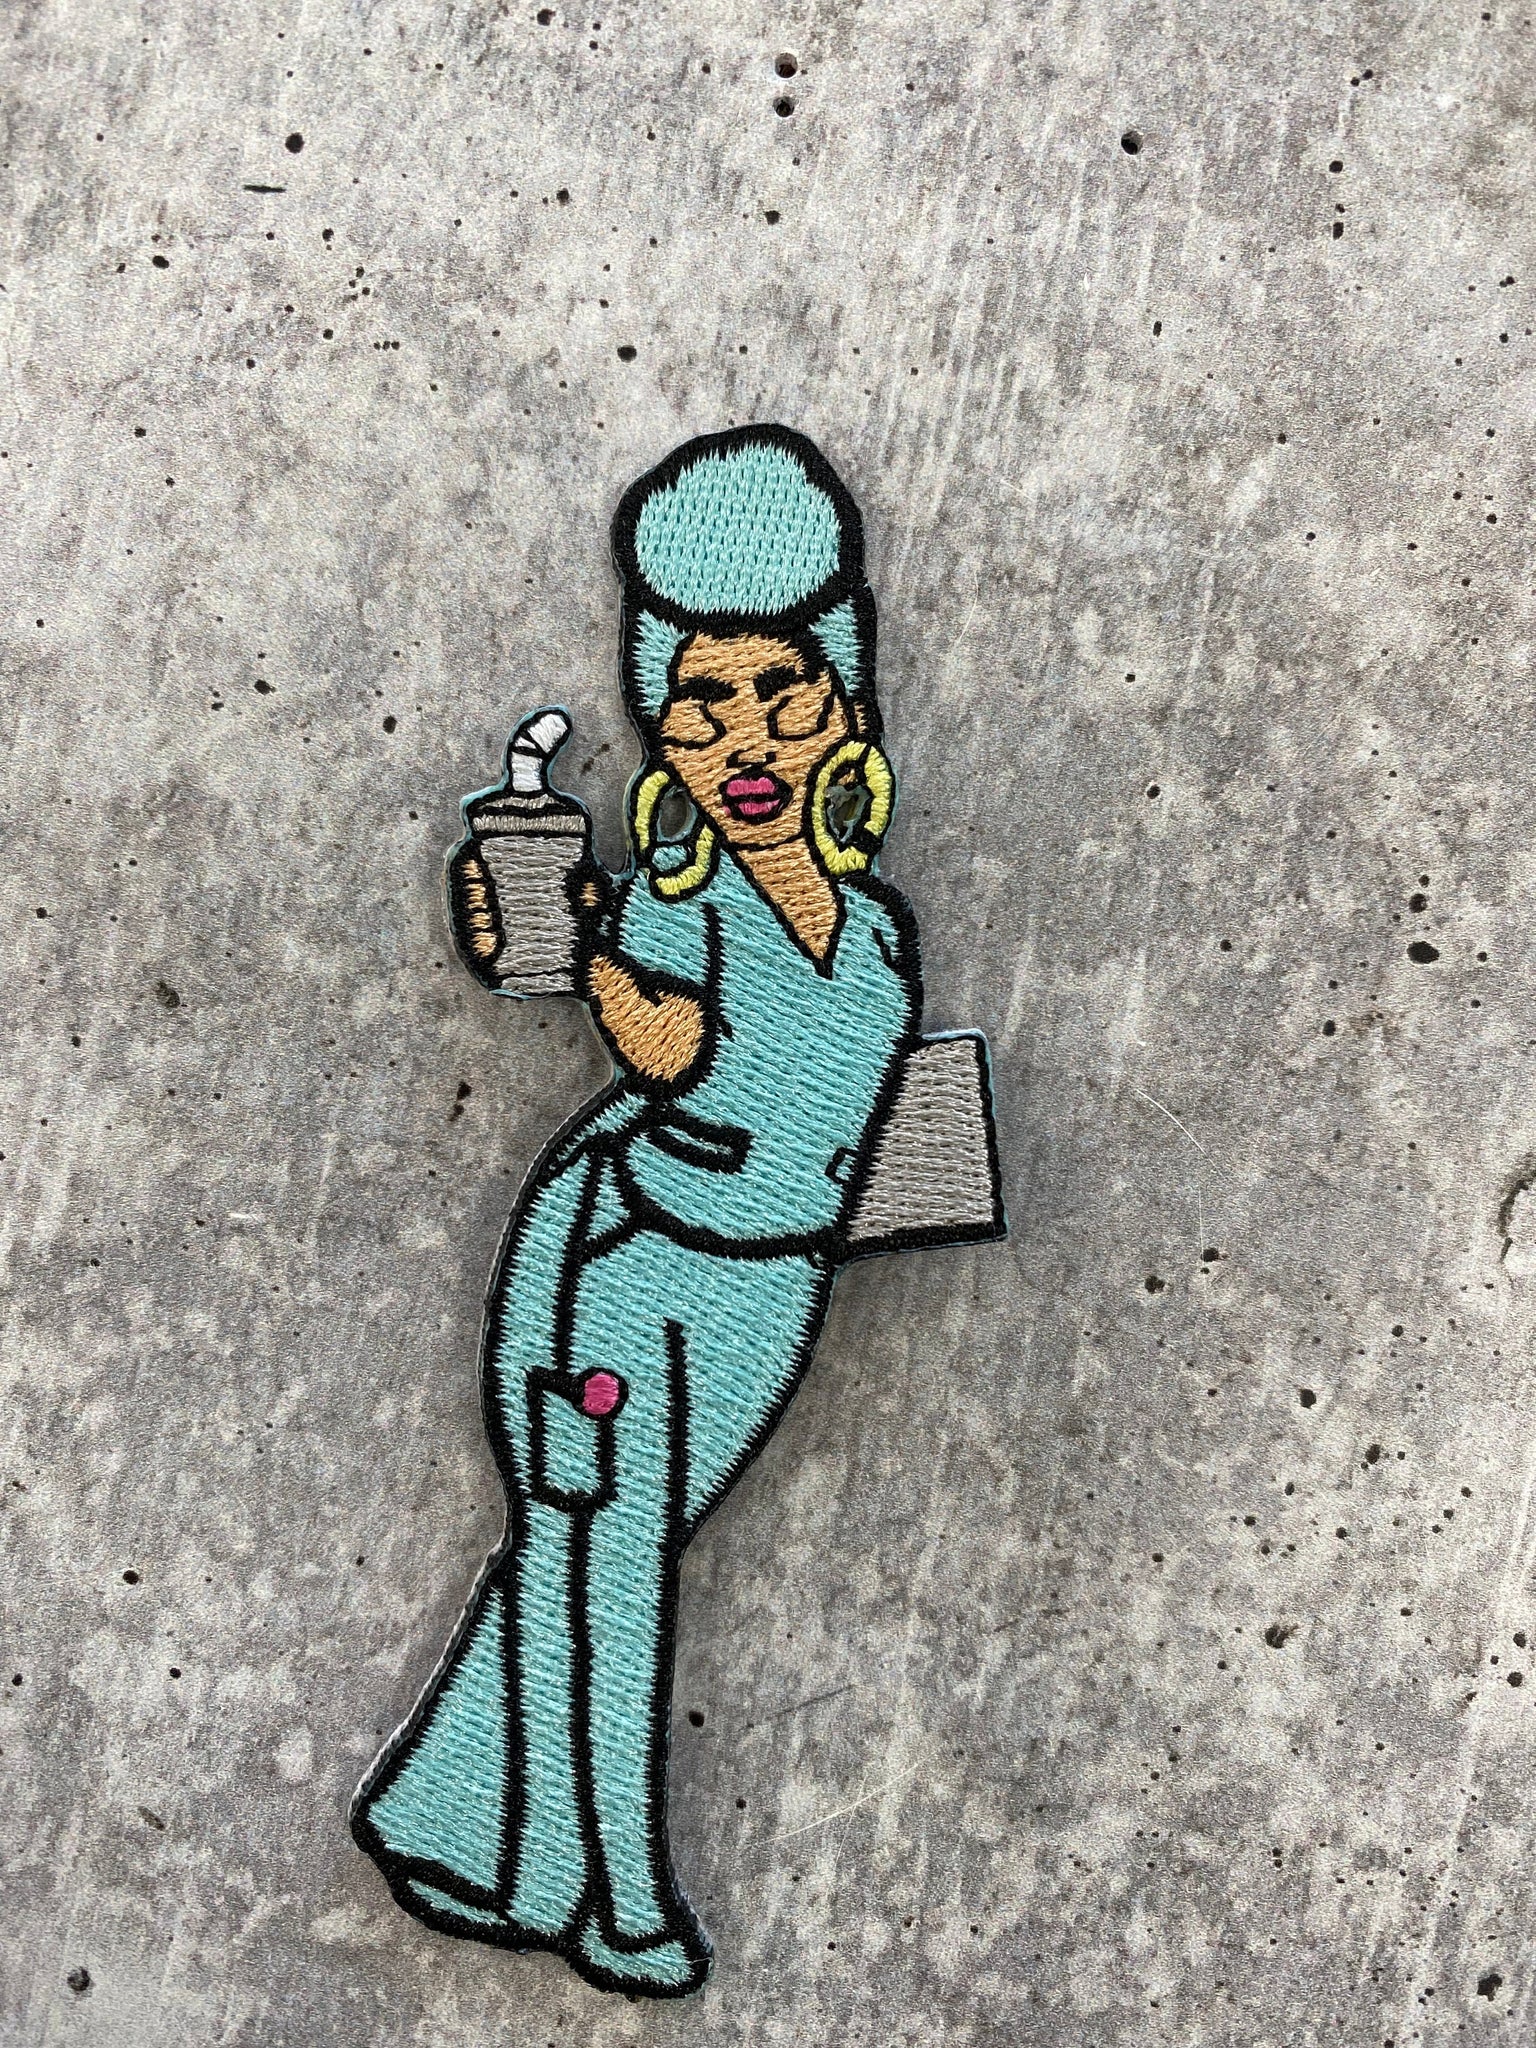 New Arrival, "Nurse Eva" Light with Coffee Clipboard, 100% Embroidery, Size 4", Iron-on Applique, DIY Patch for Clothing &Shoes, Nurse Patch